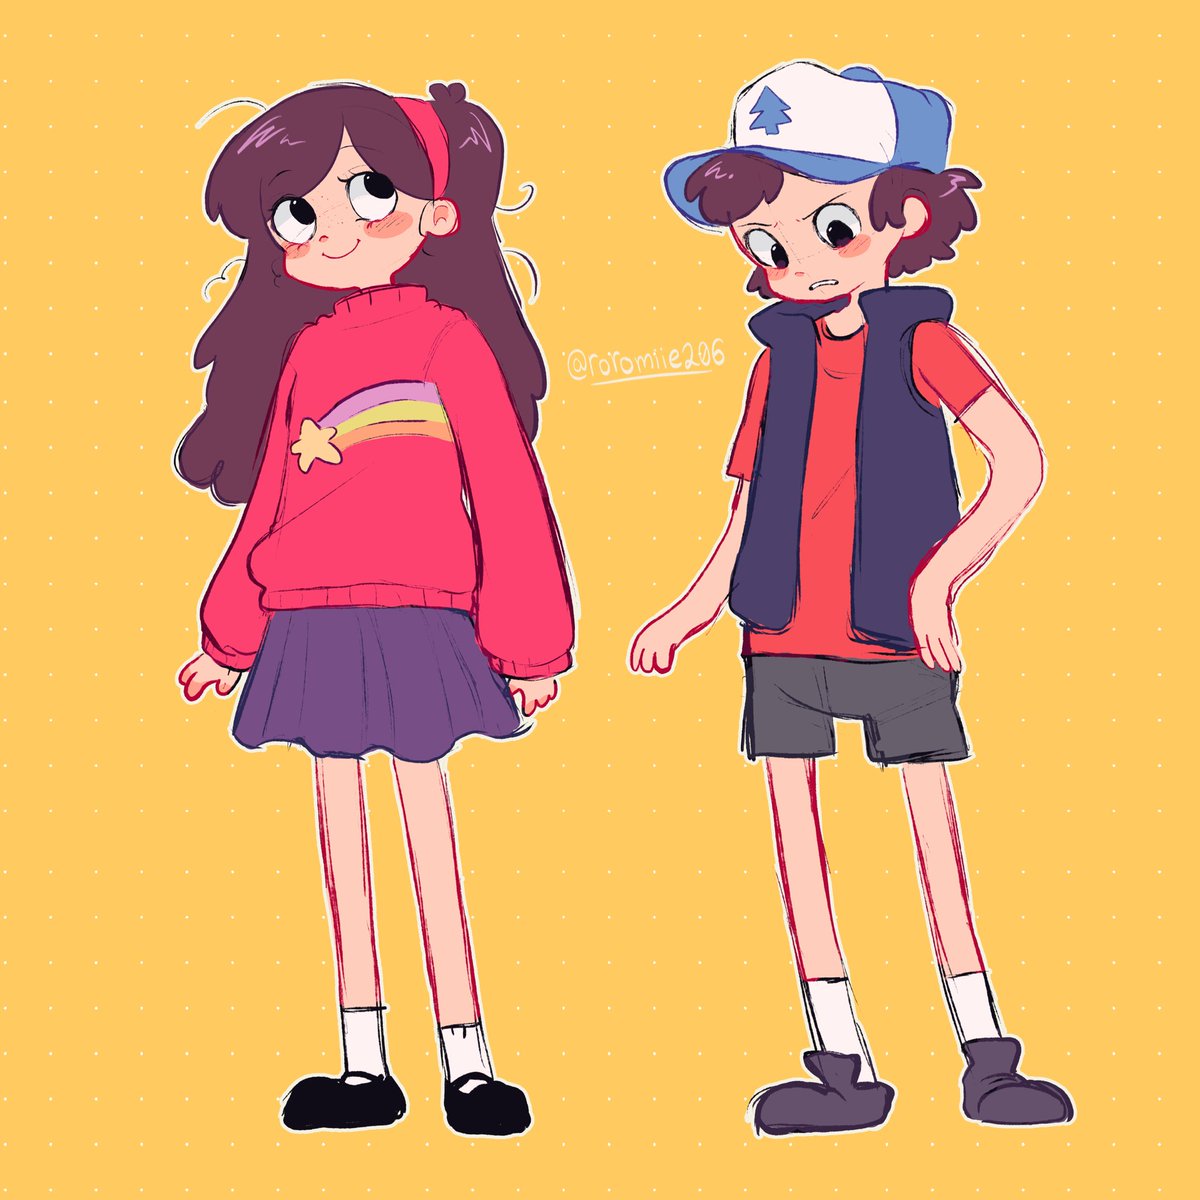 been in a gravity falls mood… i love you pines twins #GravityFalls #MabelPines #DipperPines #fanart